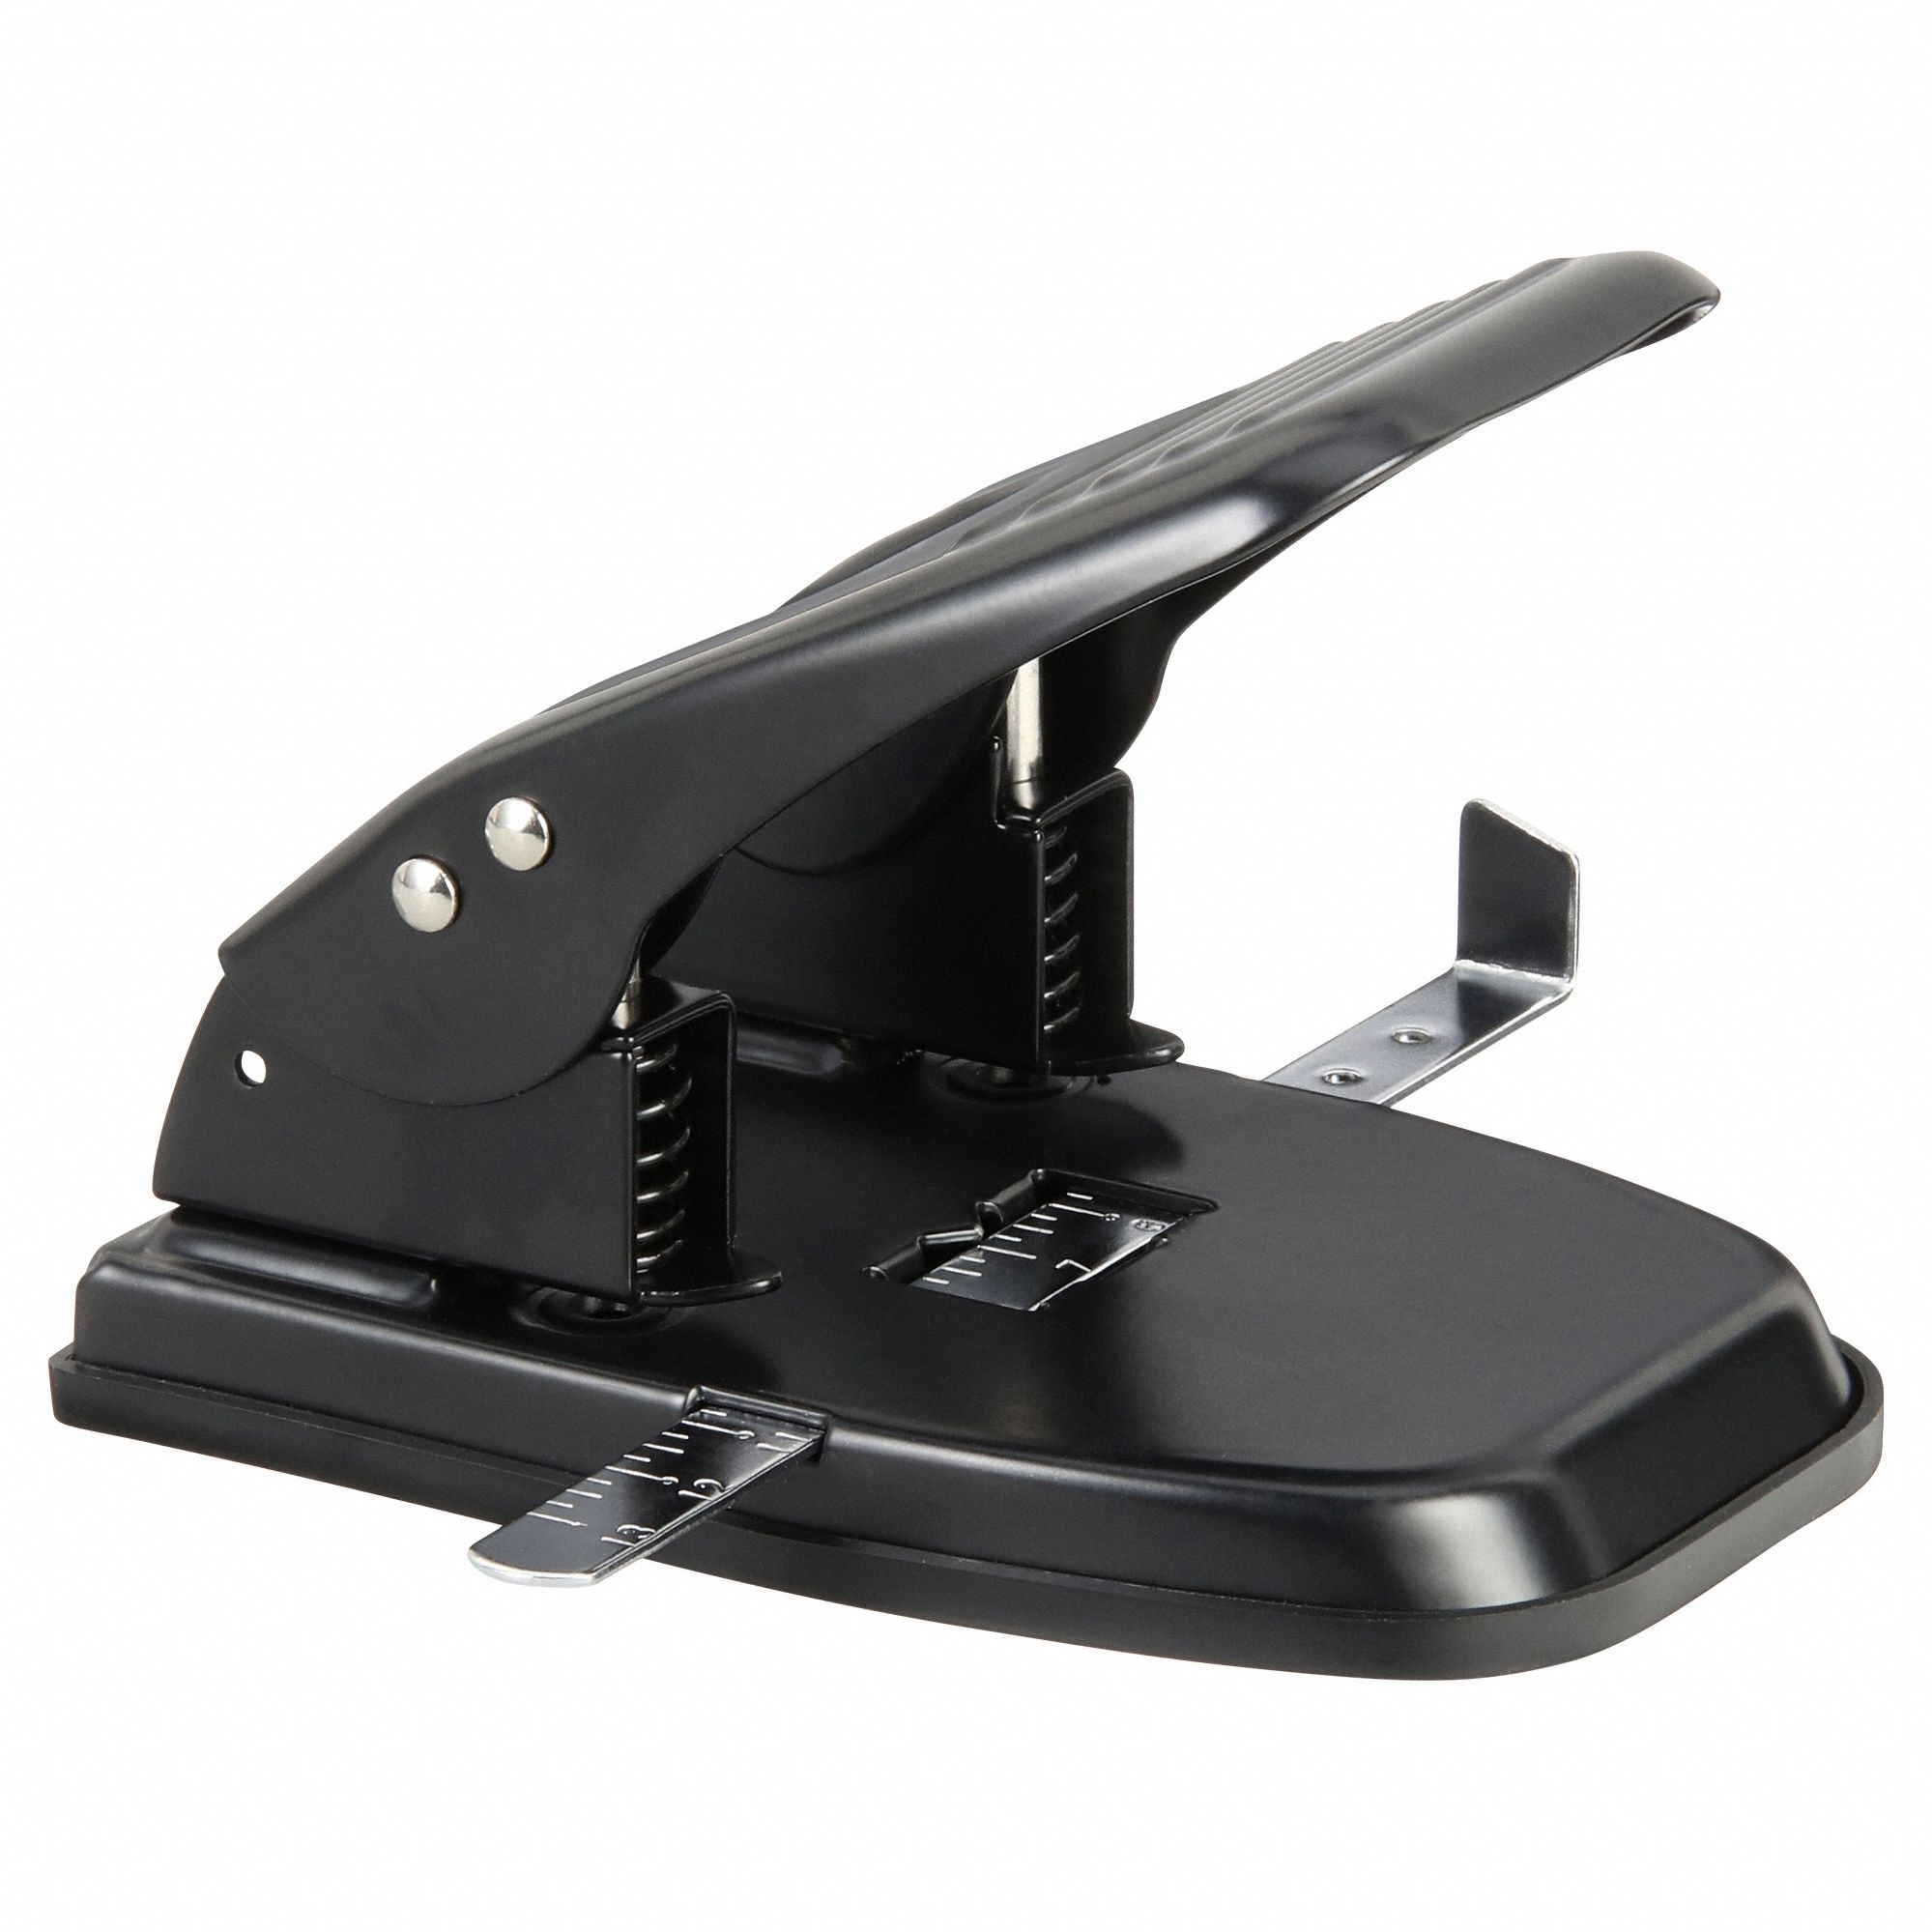 30 Sheet Capacity, Metal, Two-Hole Paper Punch - 2WFT7